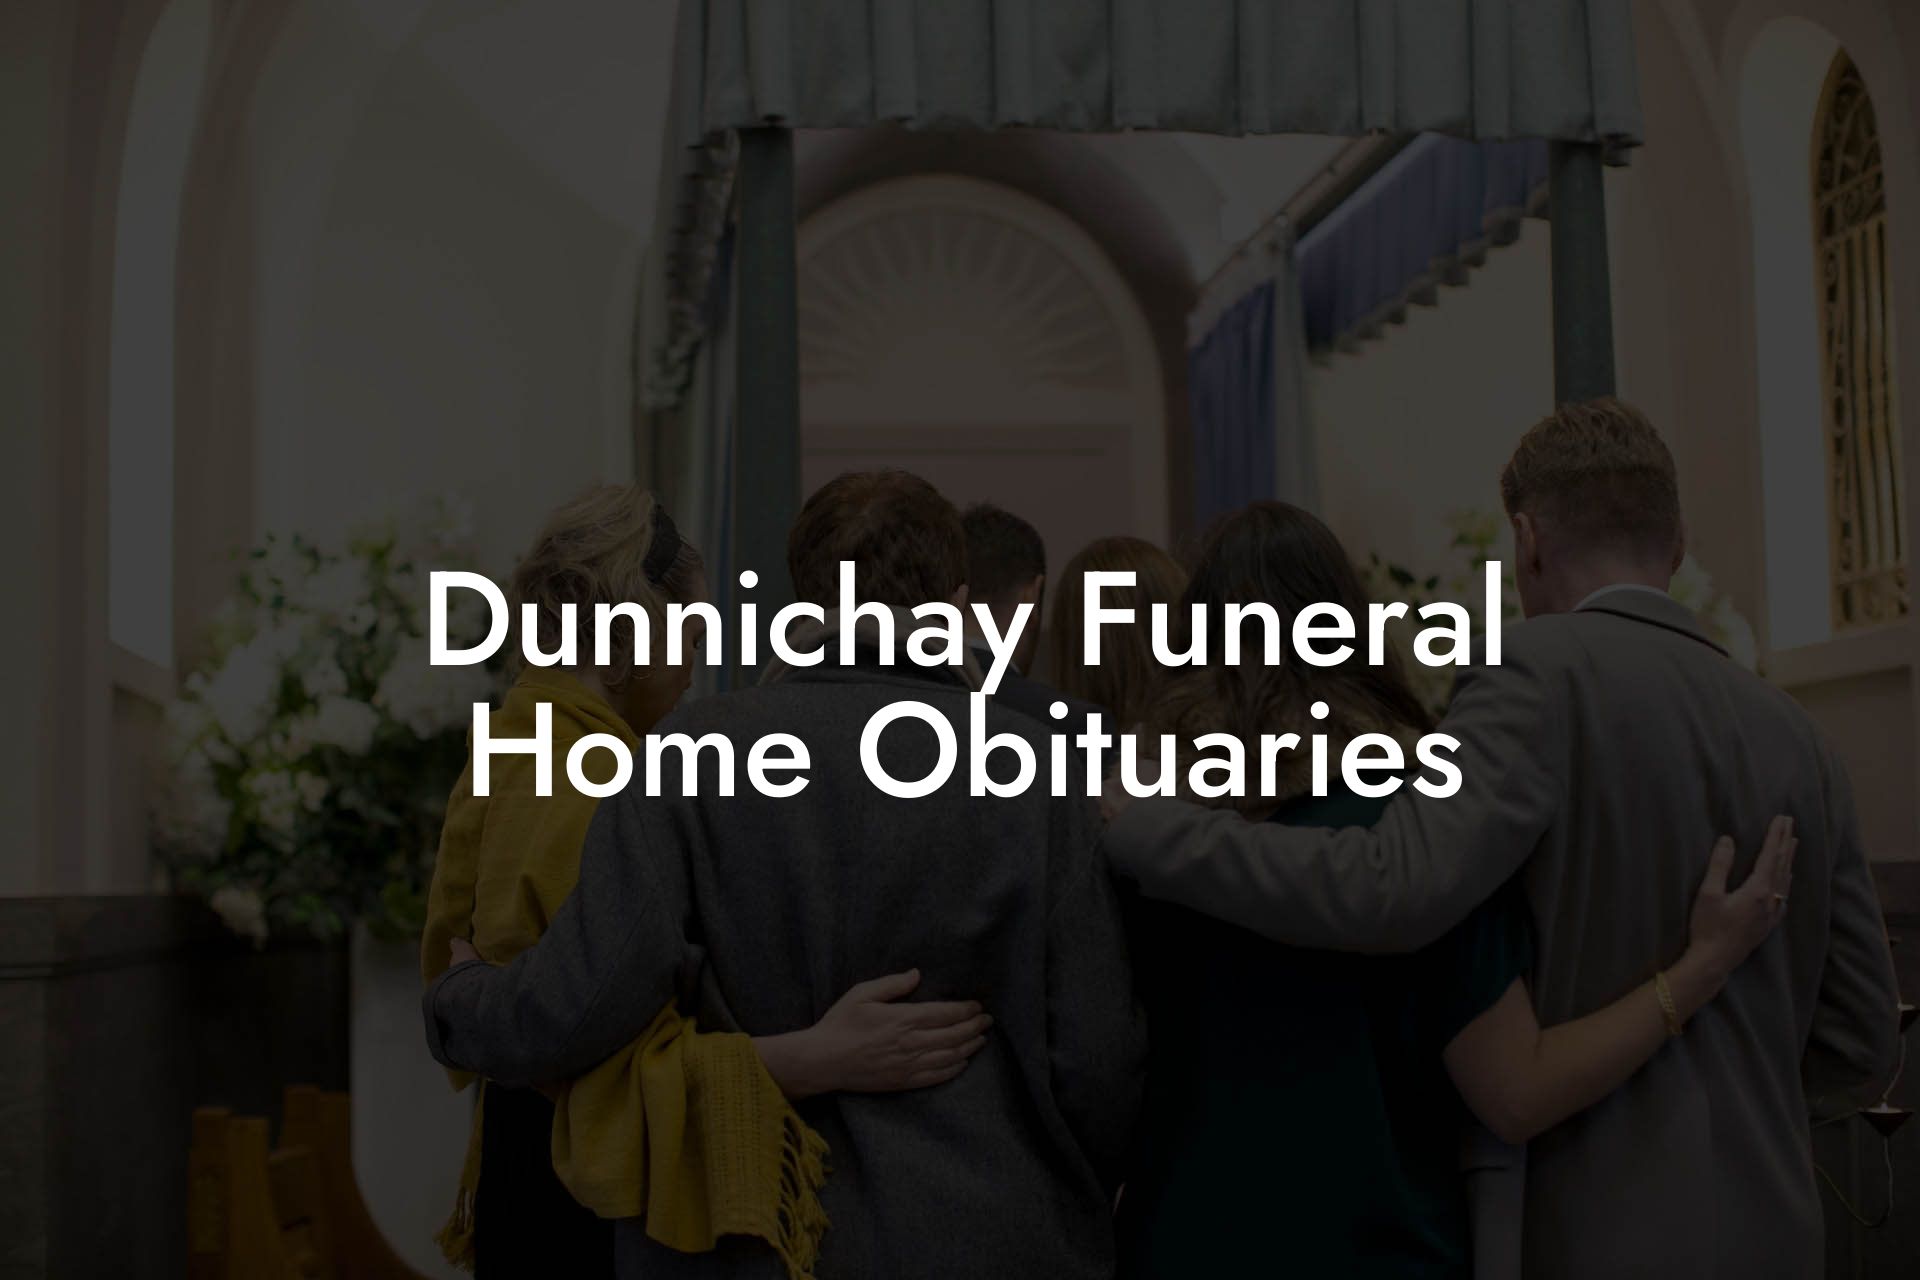 Dunnichay Funeral Home Obituaries